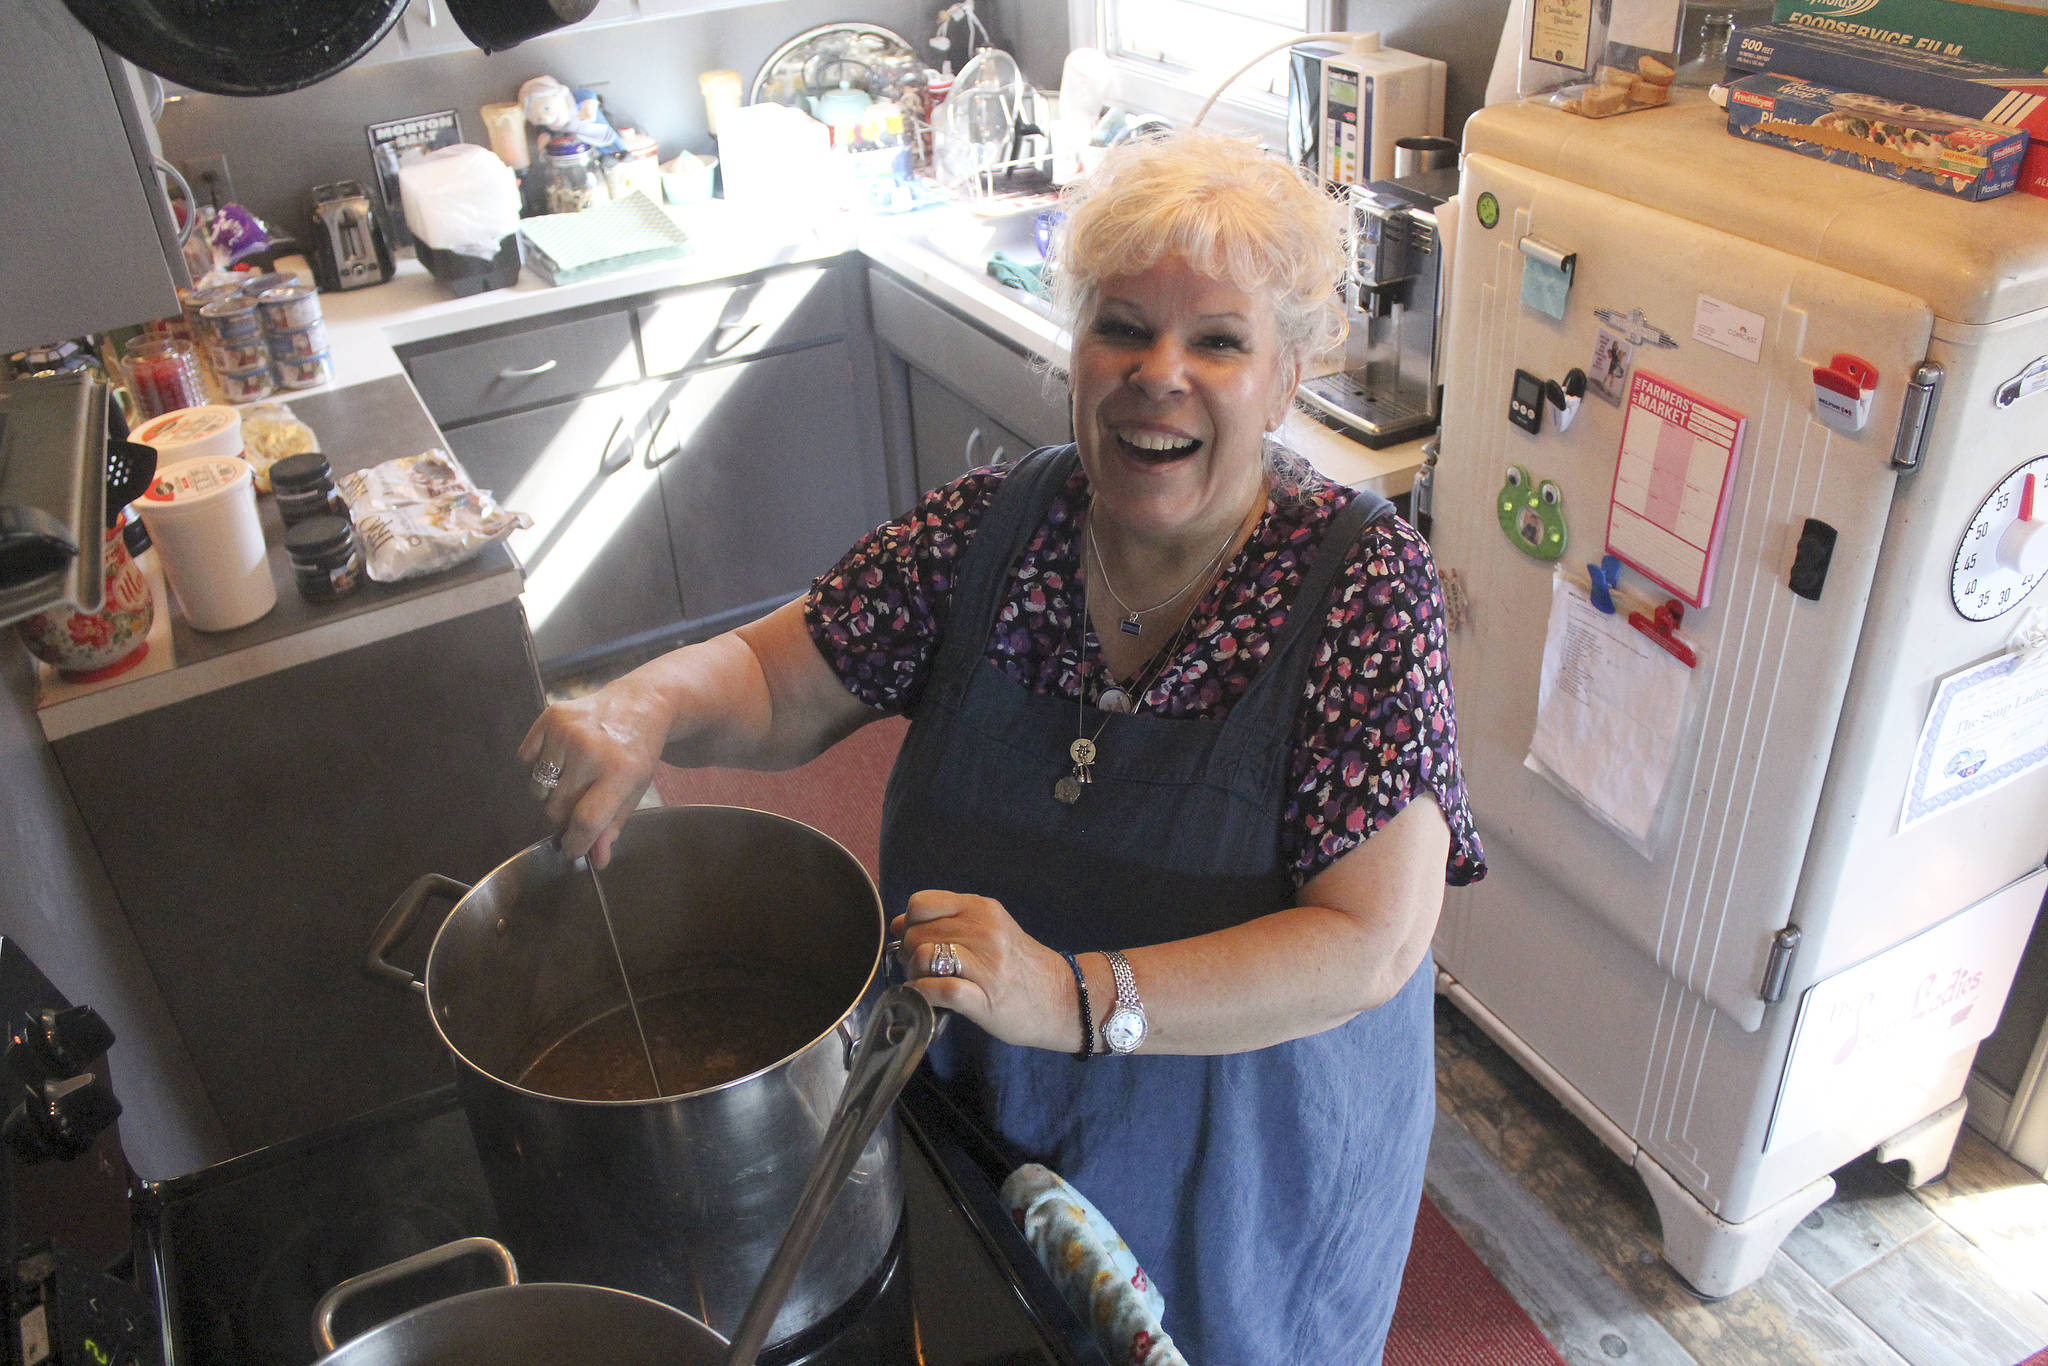 Ginger “Mama” Passarelli recently moved to Buckley from her Black Diamond home, but still aims to provide her services to those on the front lines both locally and nationally as the head of The Soup Ladies. Photo by Ray Miller-Still                                Ginger “Mama” Passarelli recently moved to Buckley from her Black Diamond home, but still aims to provide her services to those on the front lines both locally and nationally as the head of The Soup Ladies. Photo by Ray Miller-Still